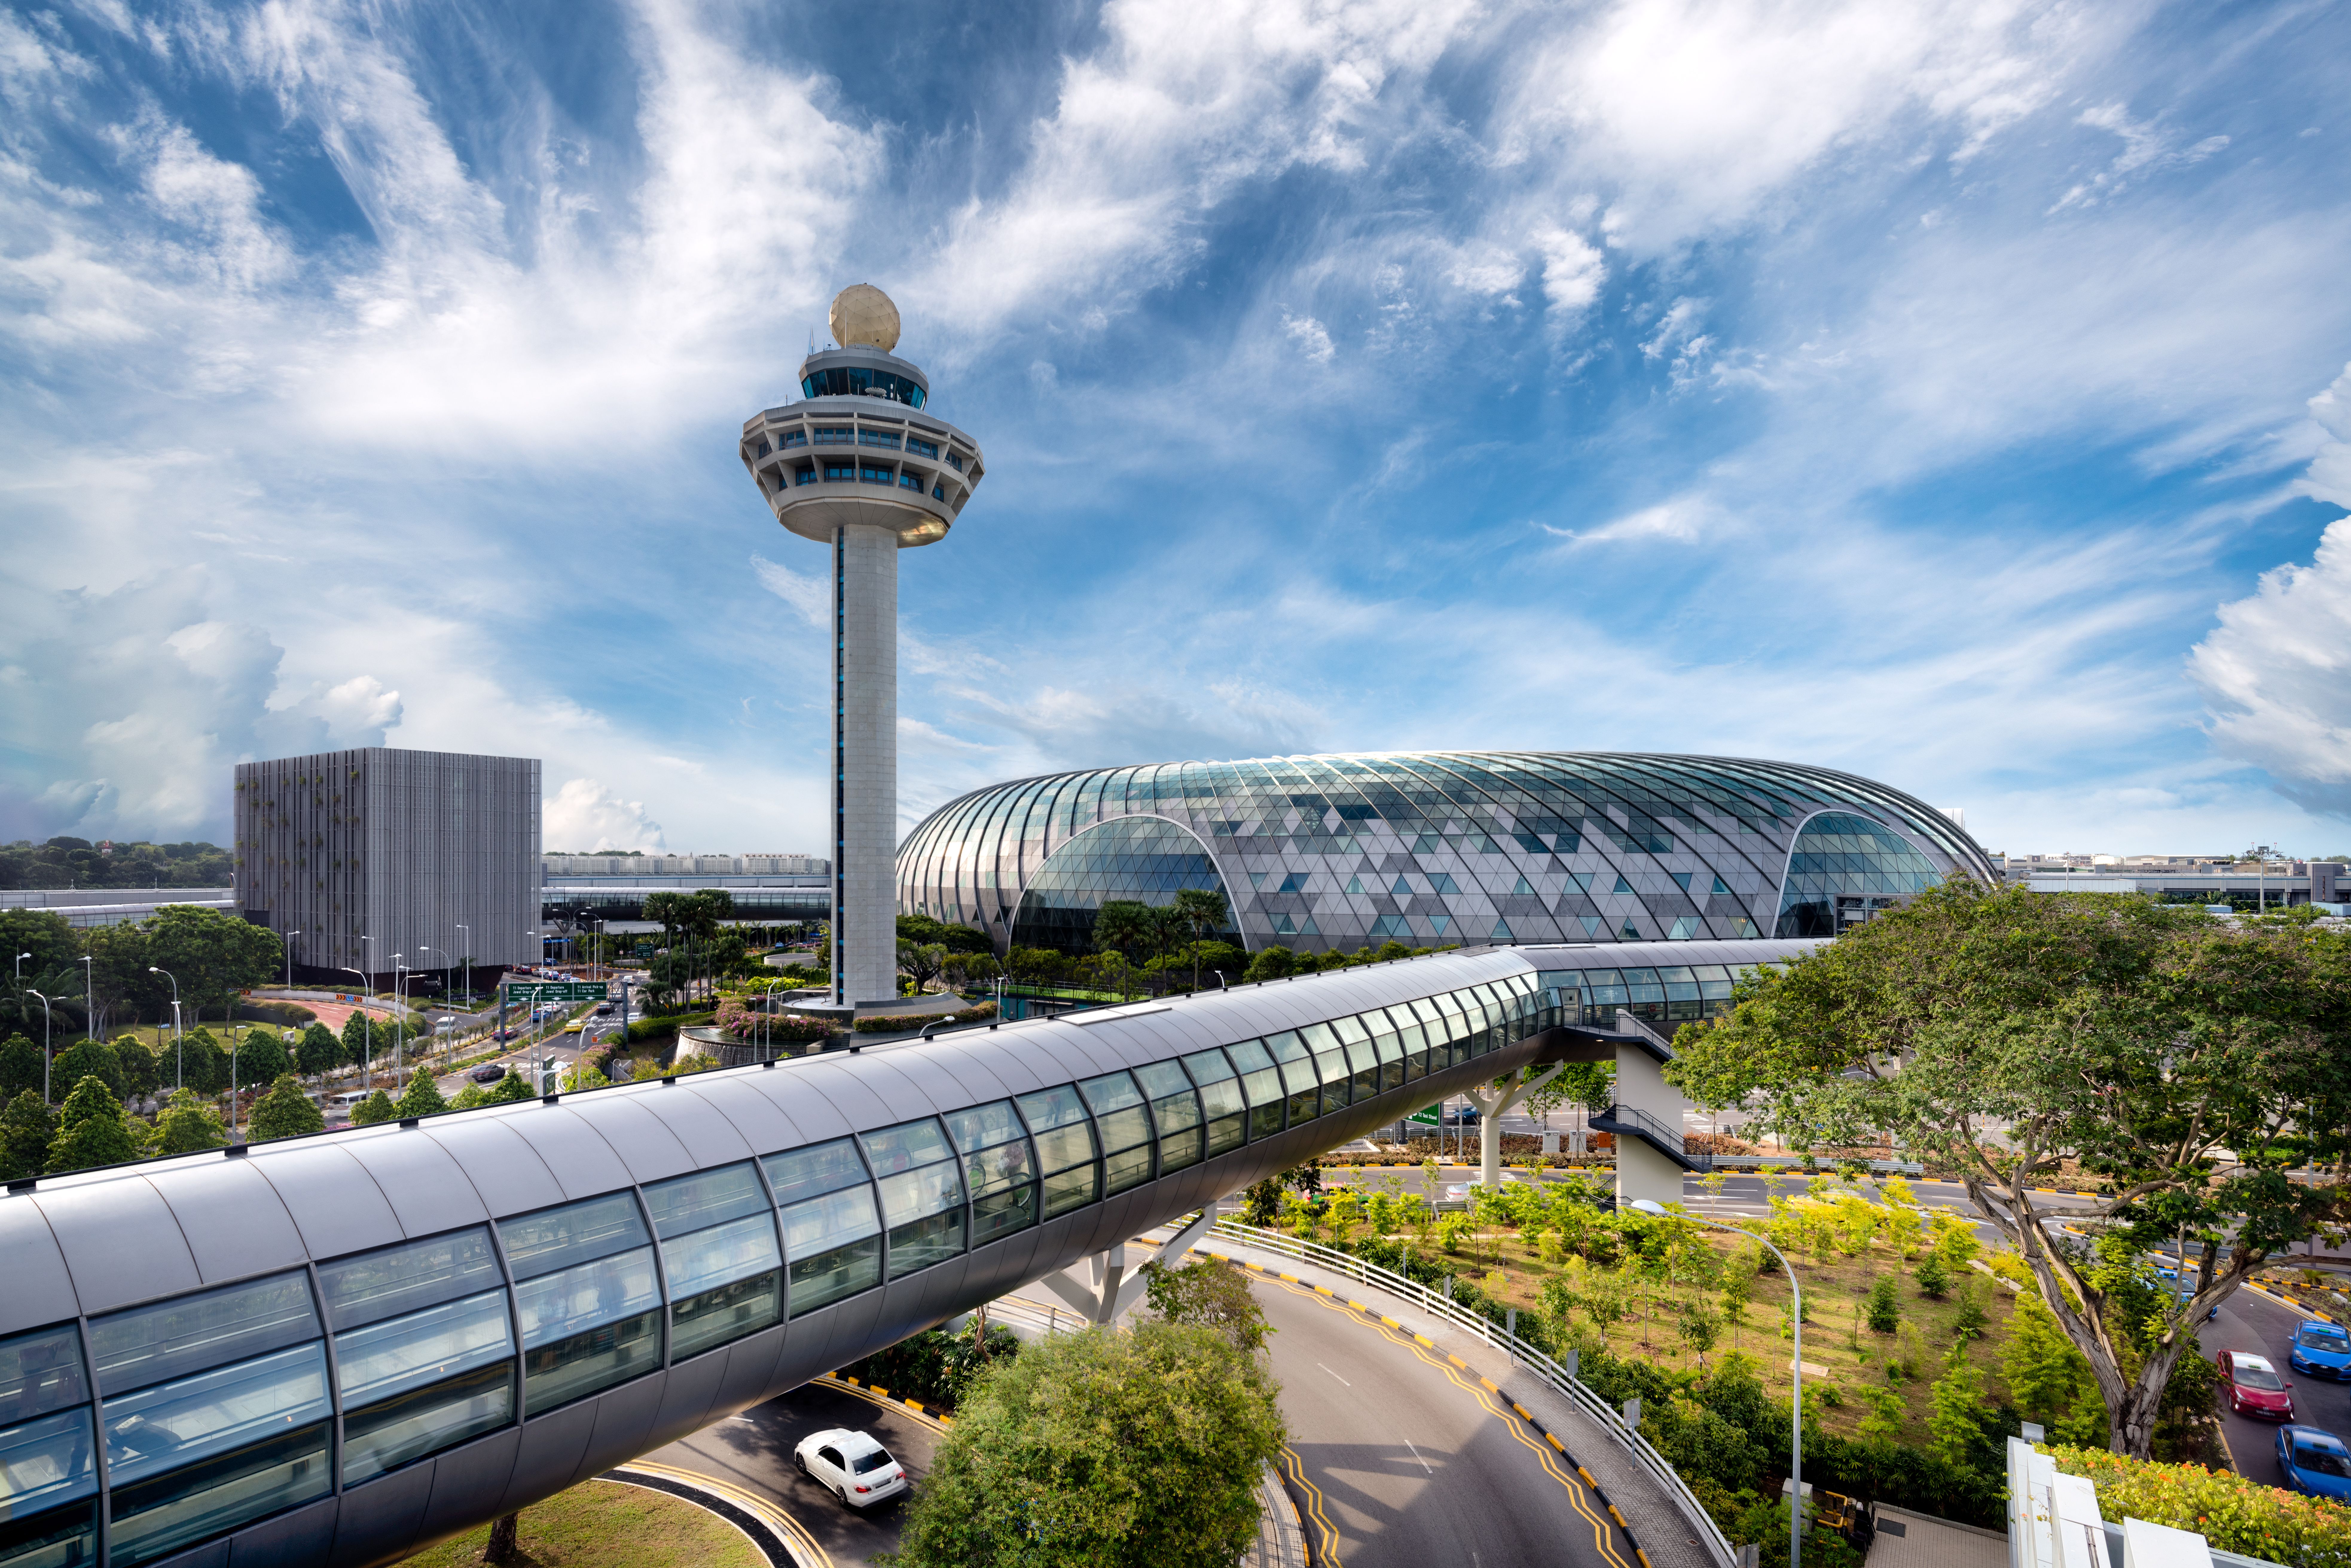 Singapore Changi Airport is now booming due to passenger demand.